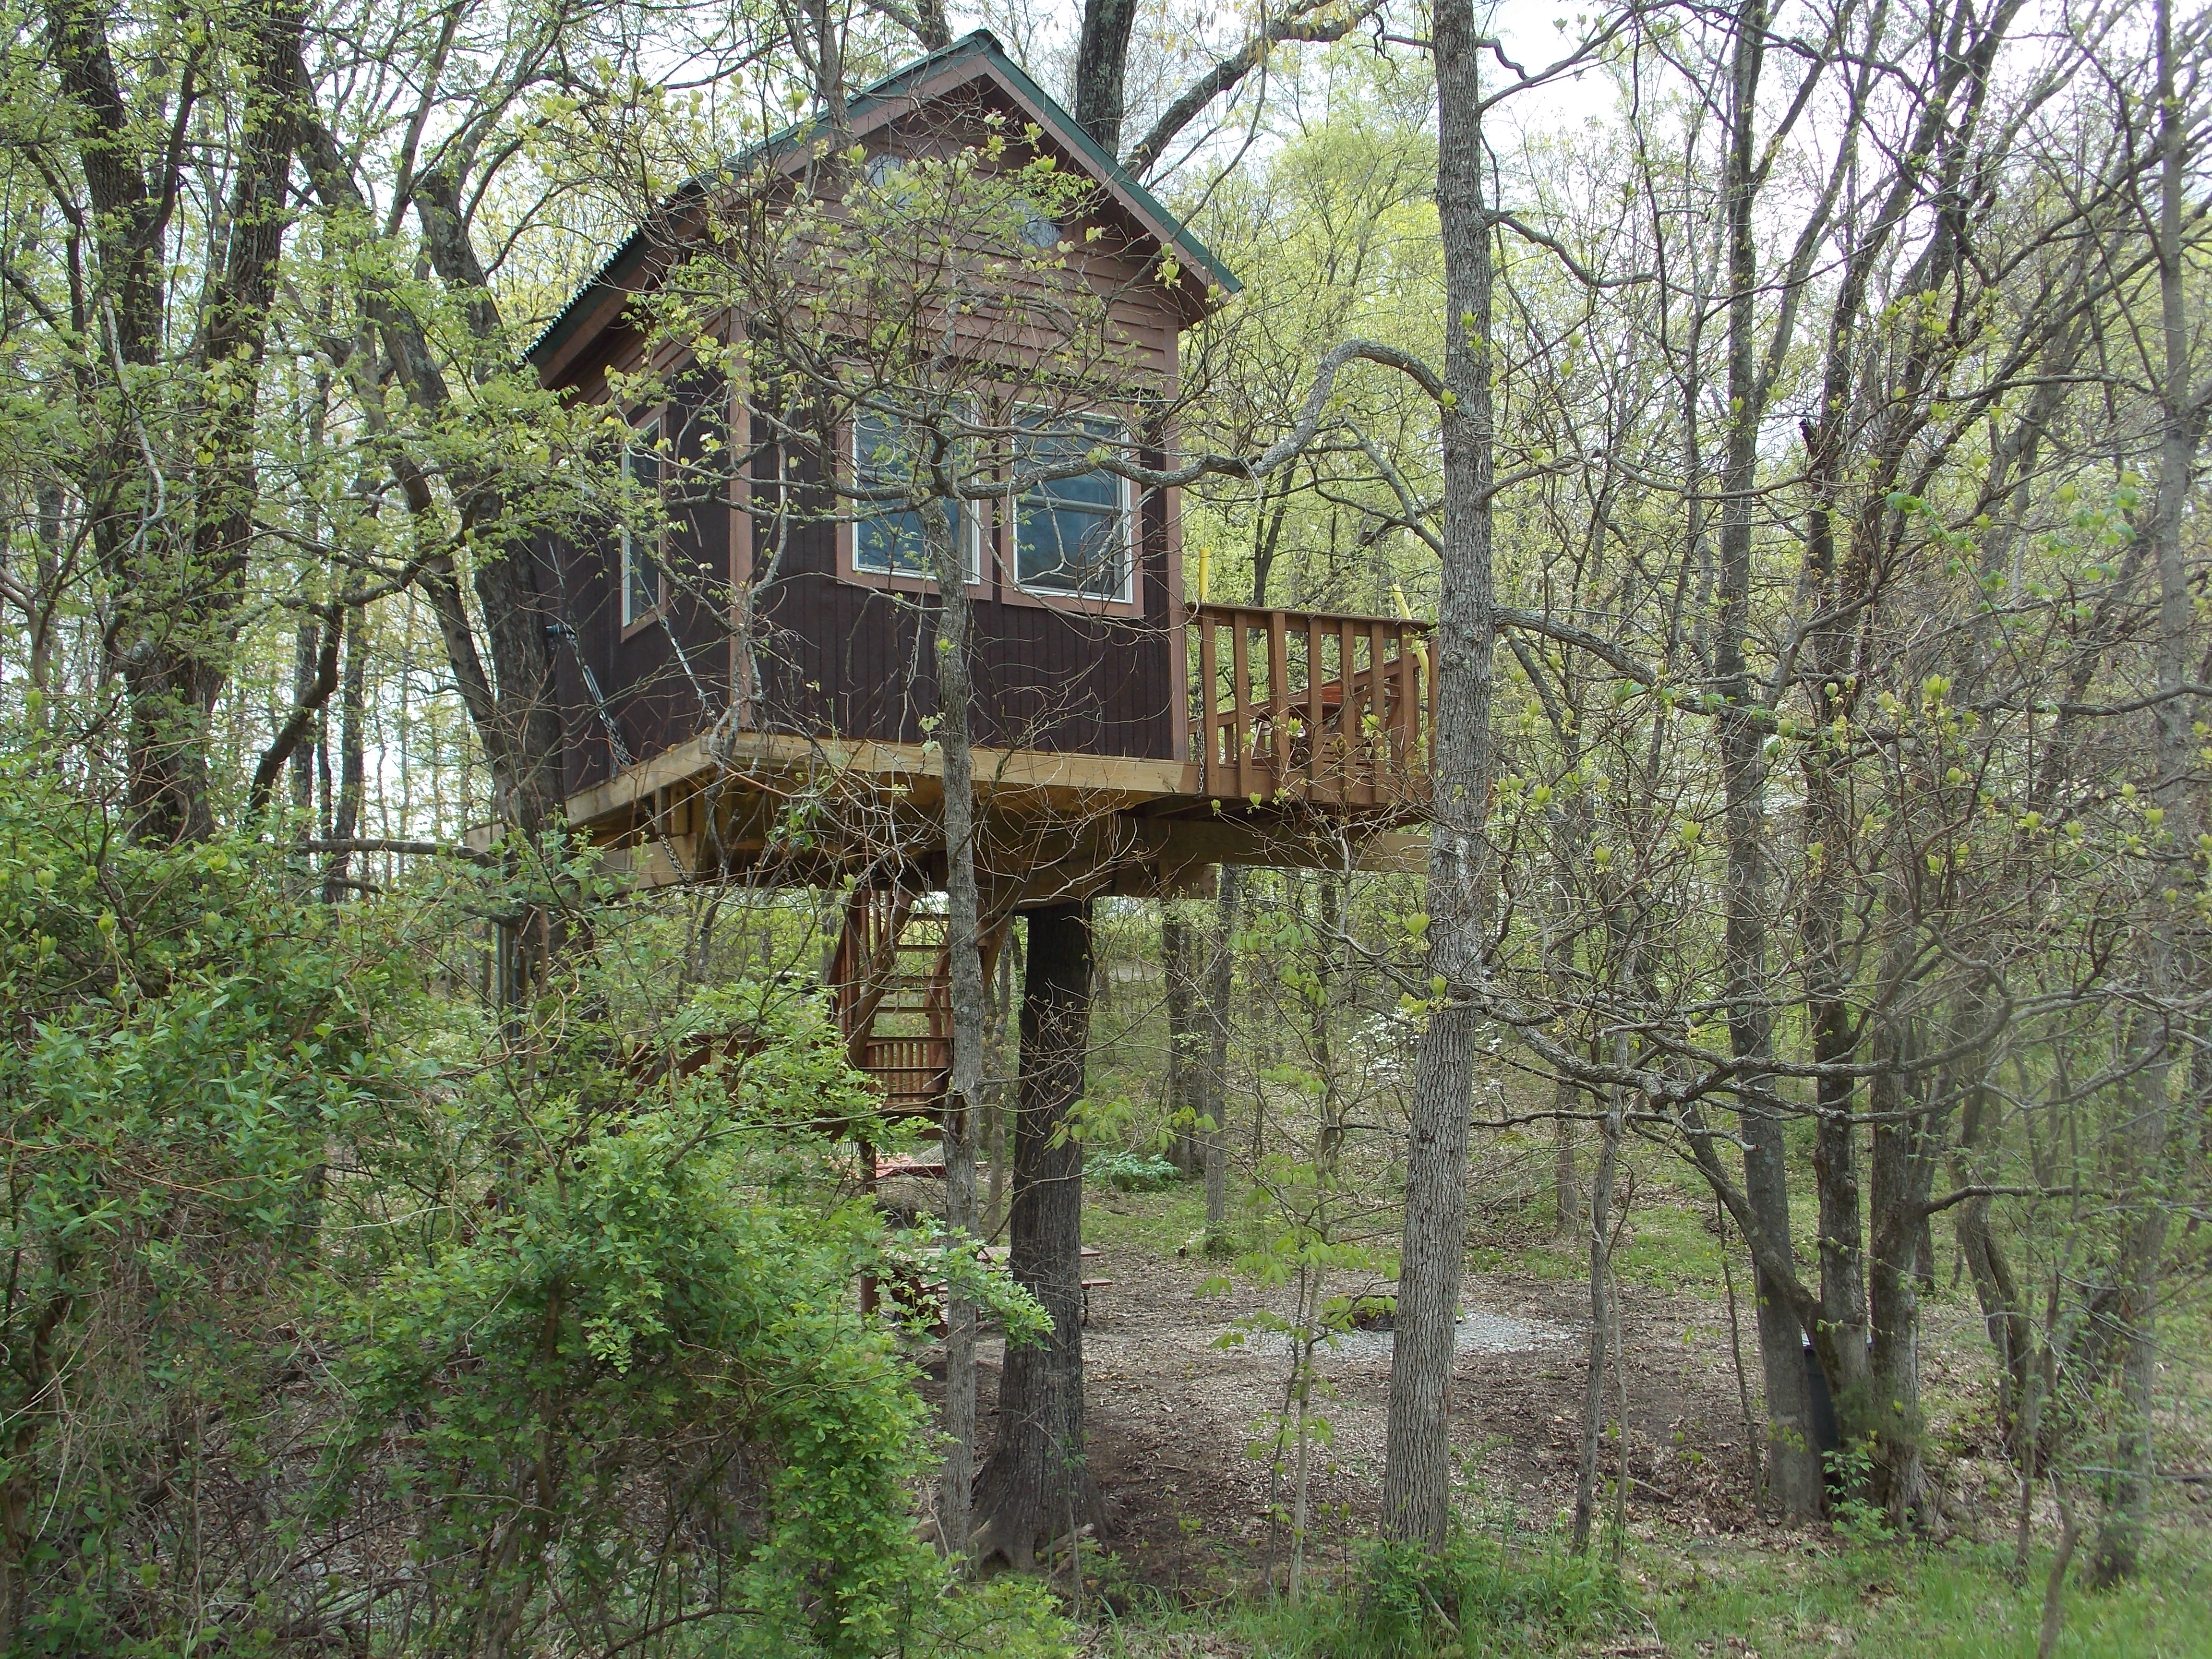 Treehouse cabins offer a lofty view in Southern Illinois - photo by Rose Hammitt